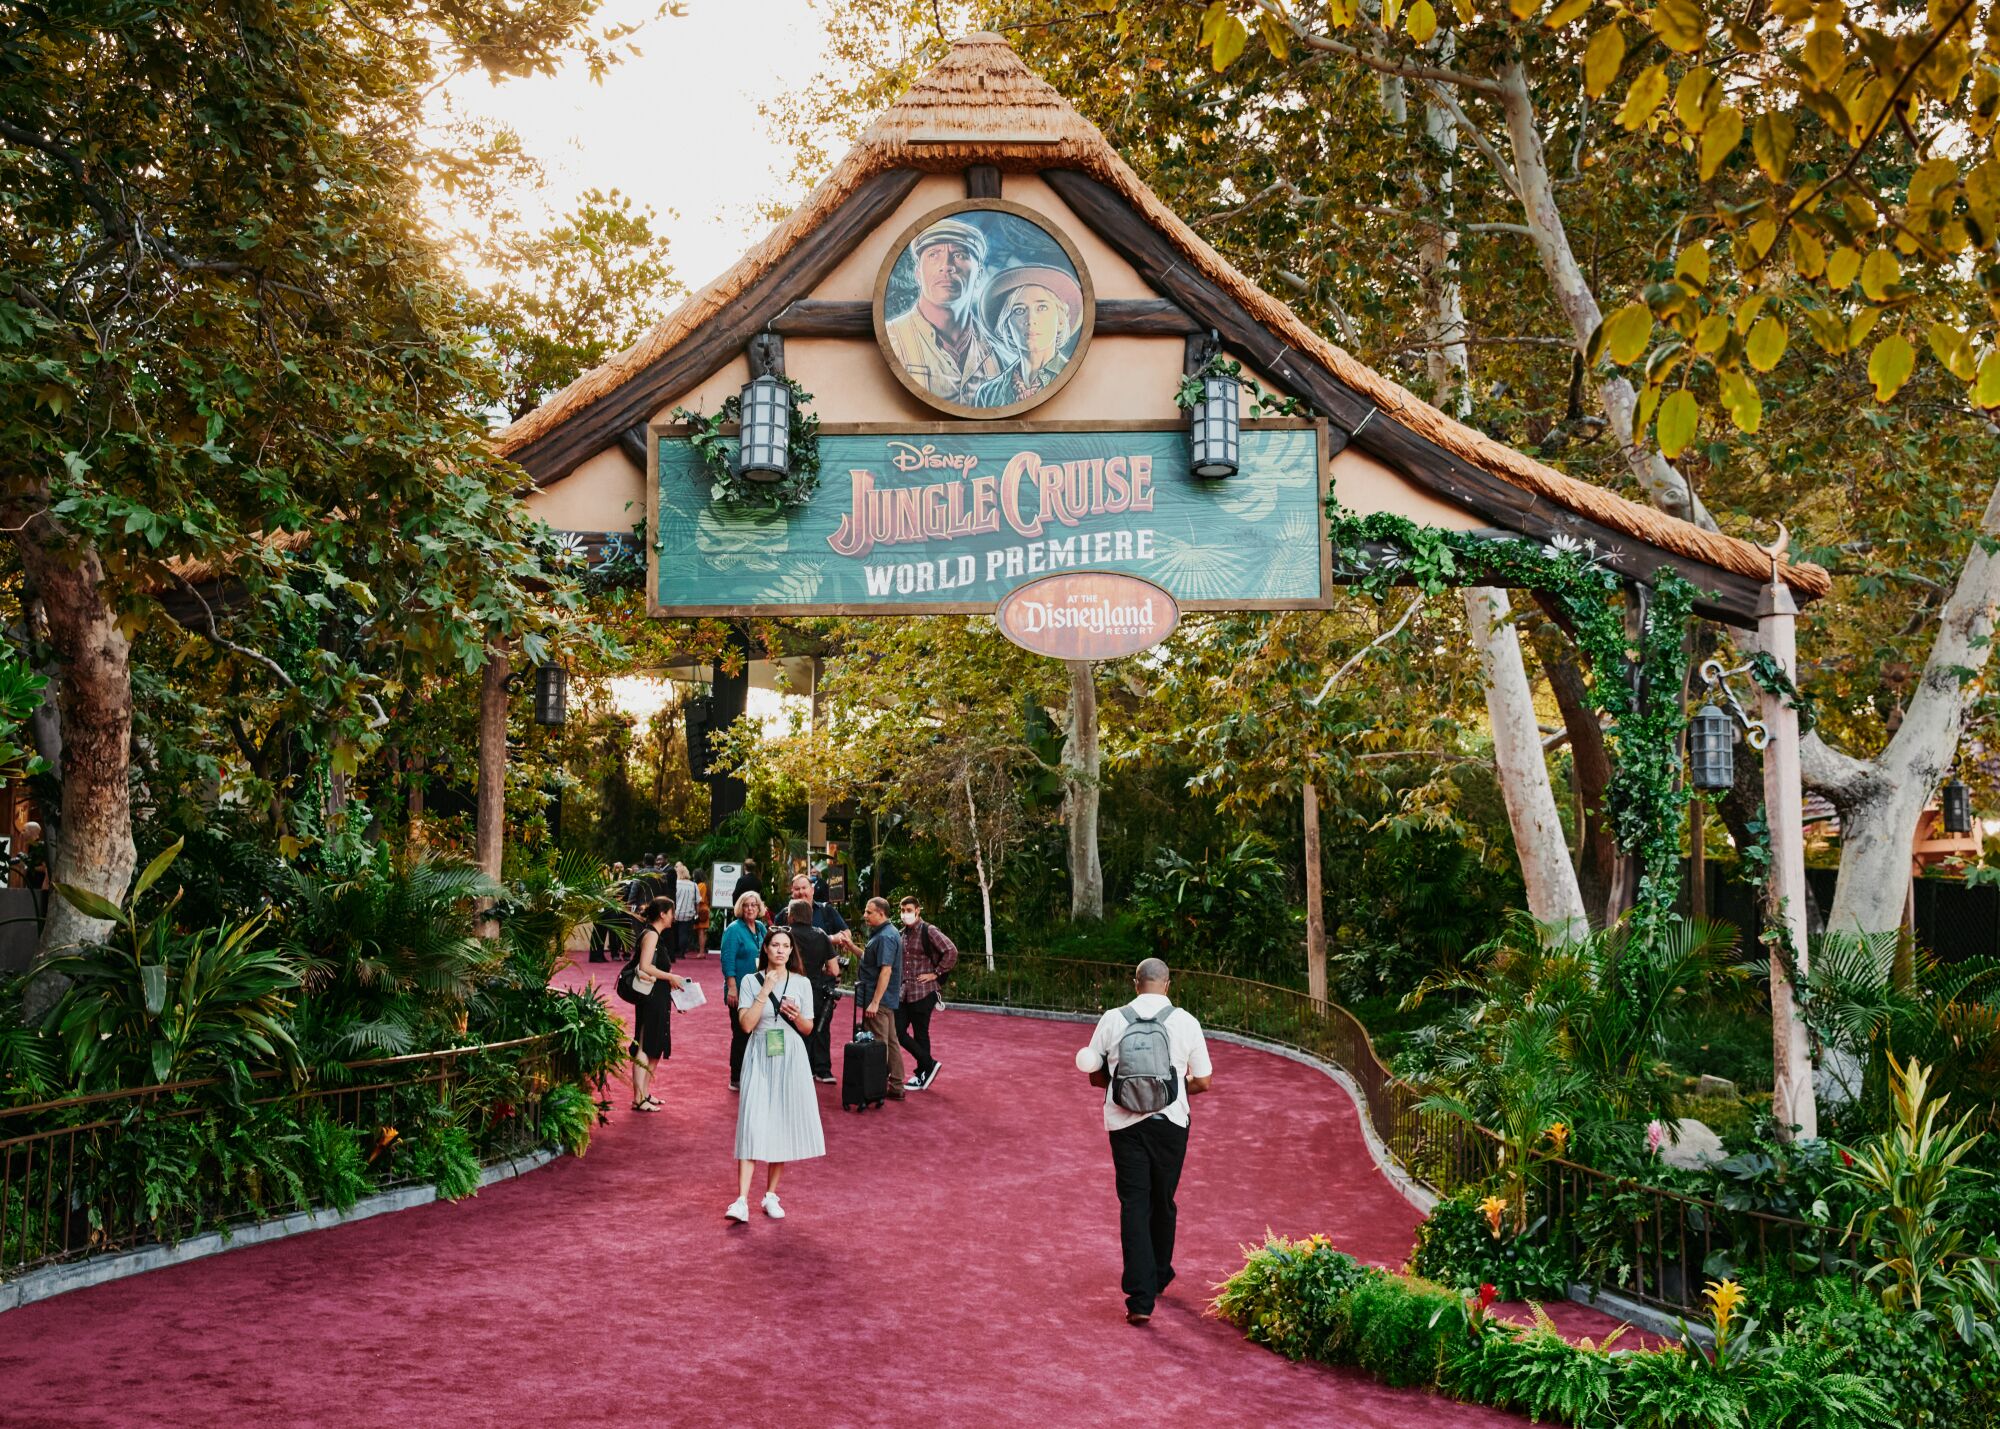 The entrance to the theater for the premiere of "The Jungle Cruise."